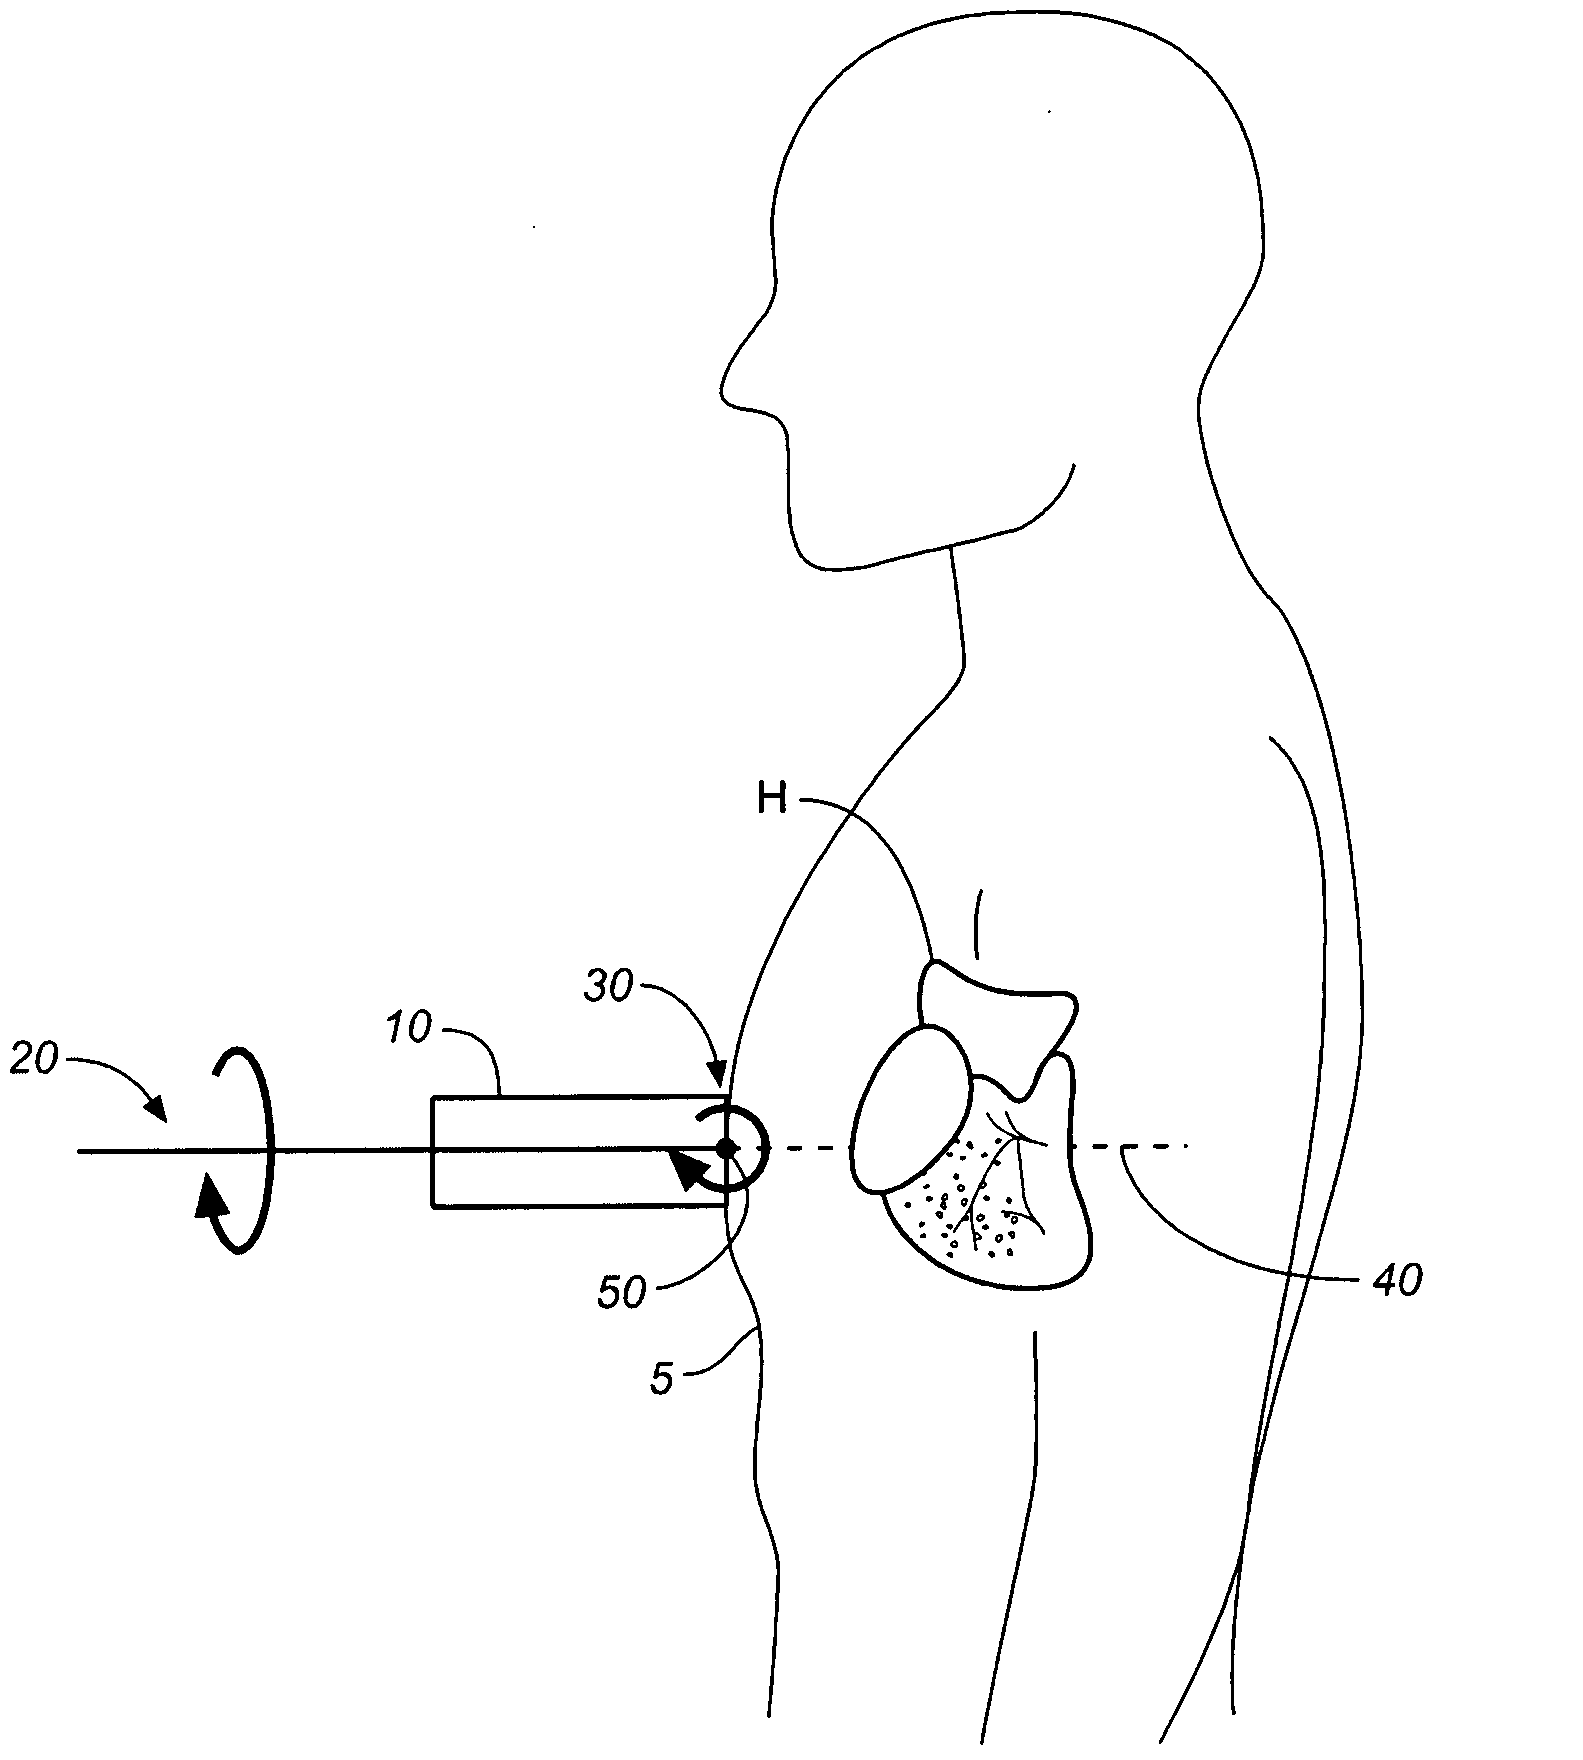 Method and apparatus to visualize the coronary arteries using ultrasound